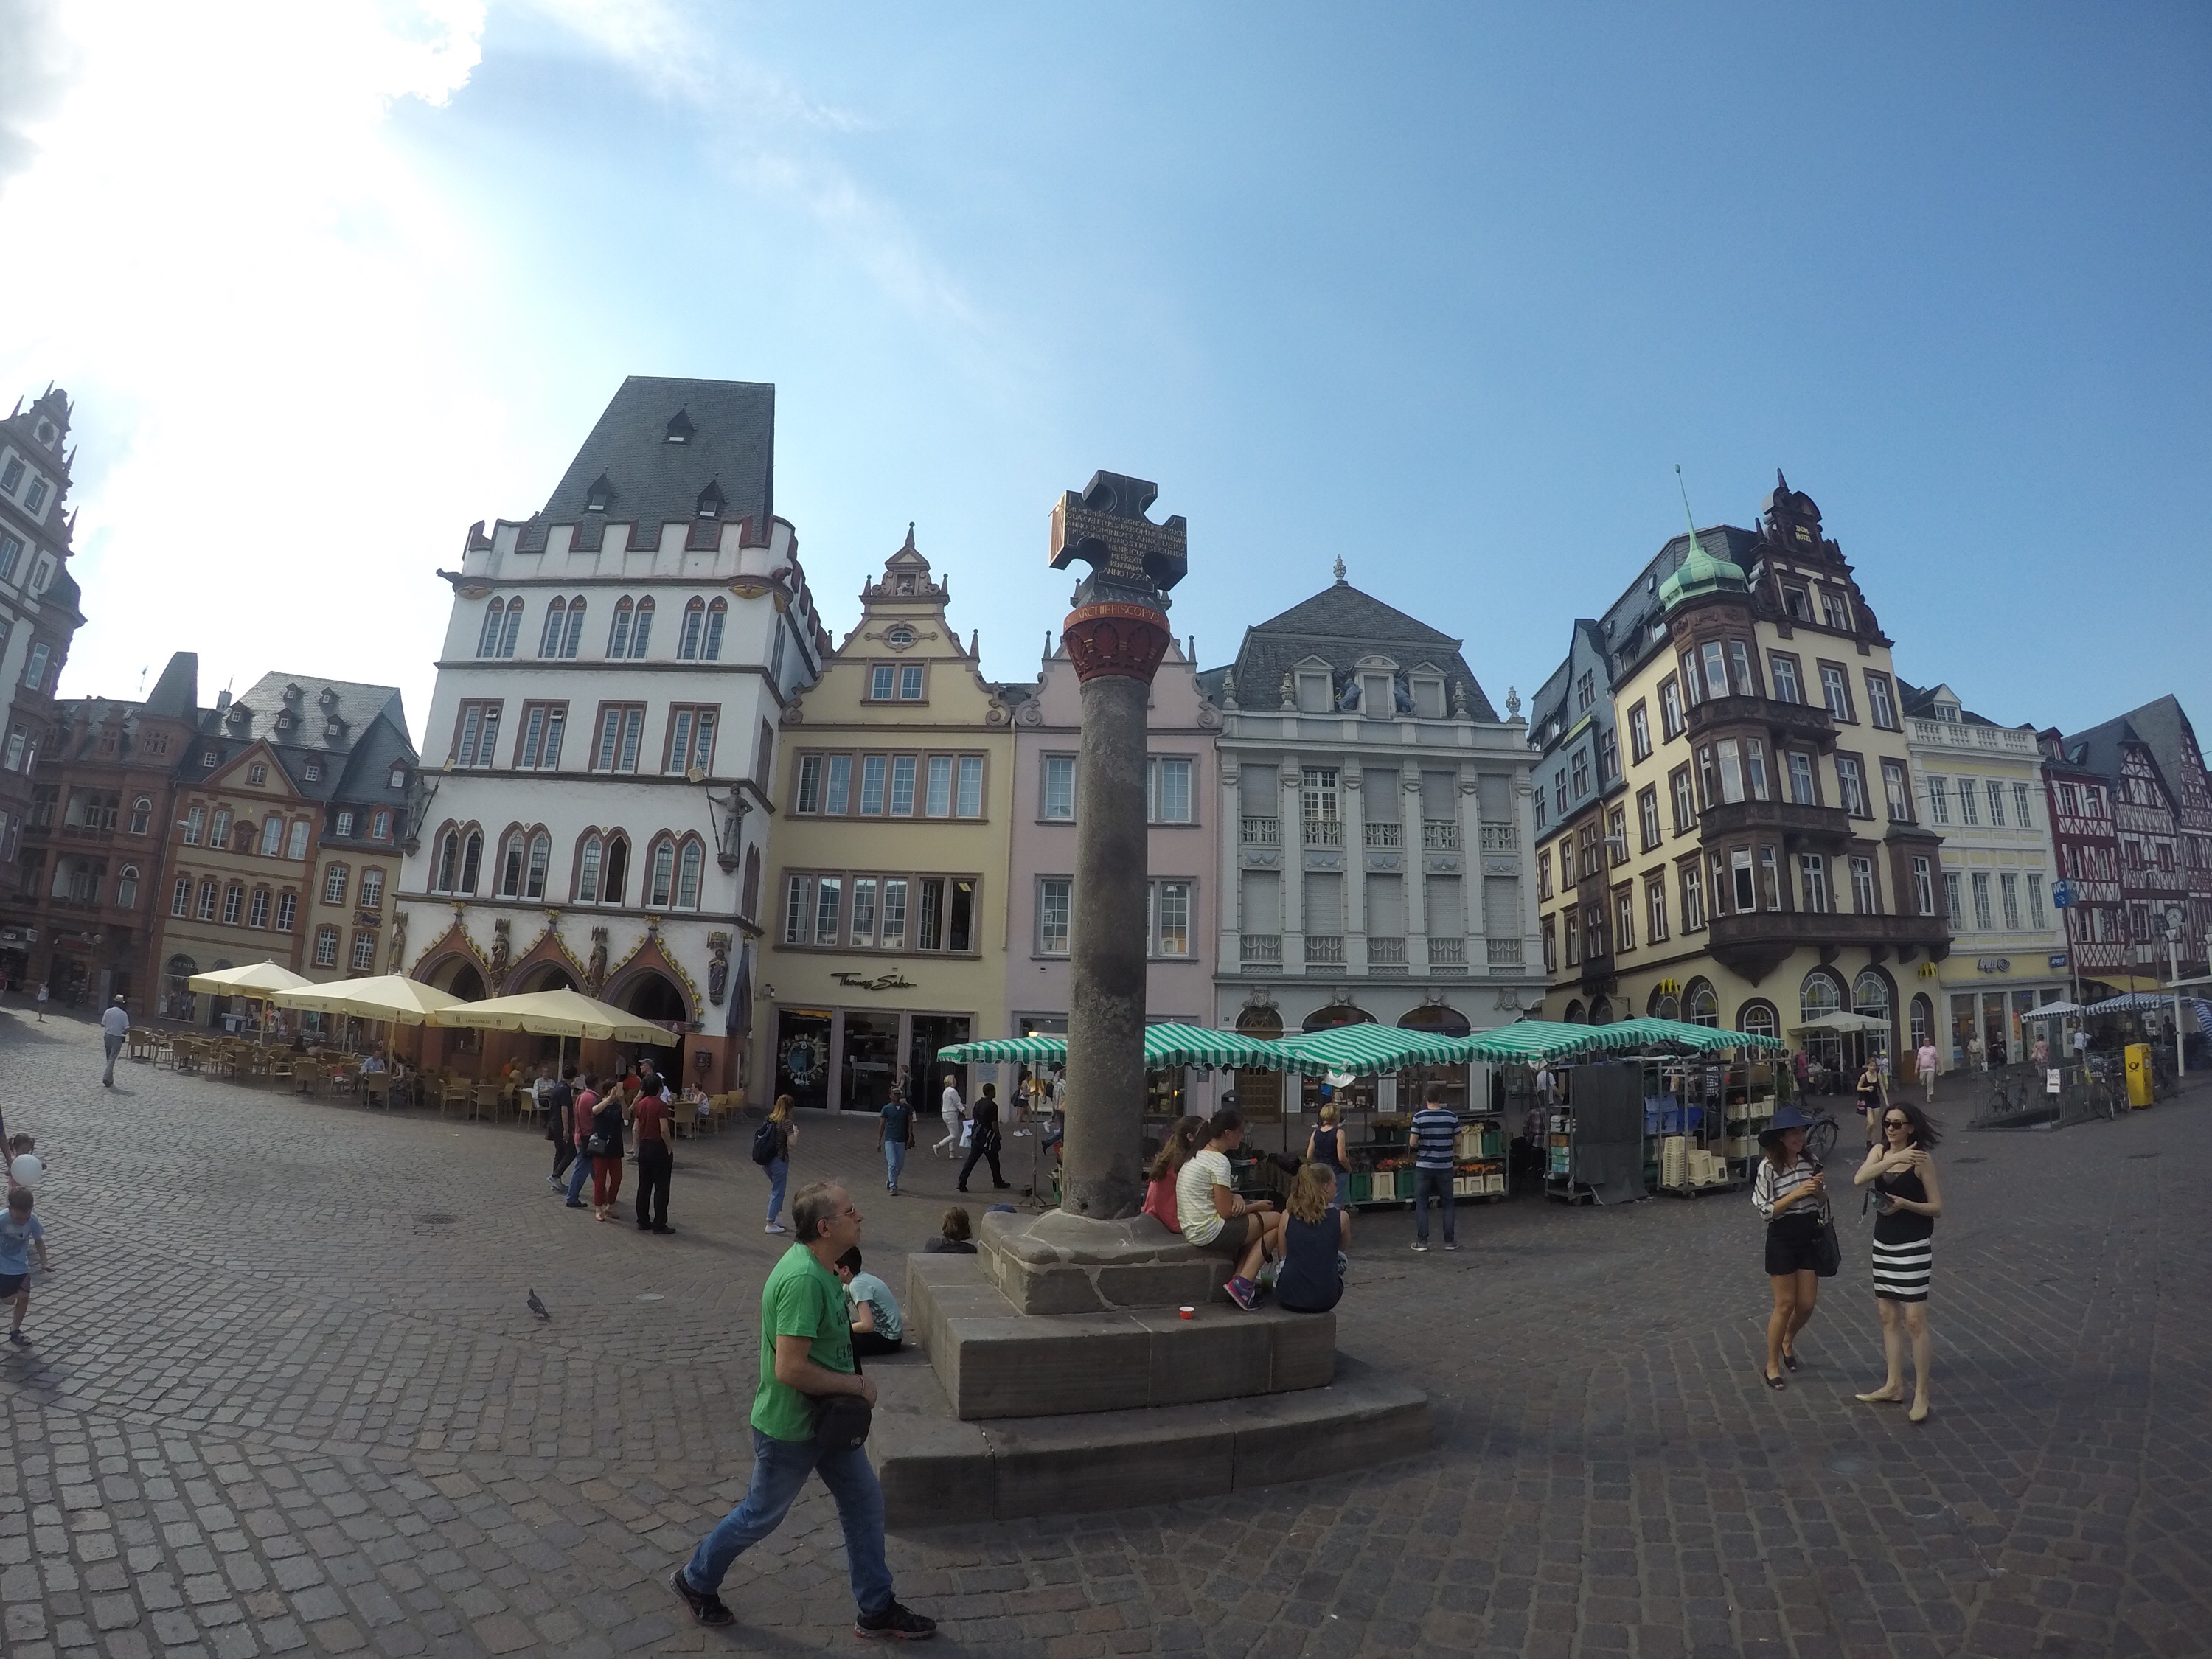 City square in Trier, Germany